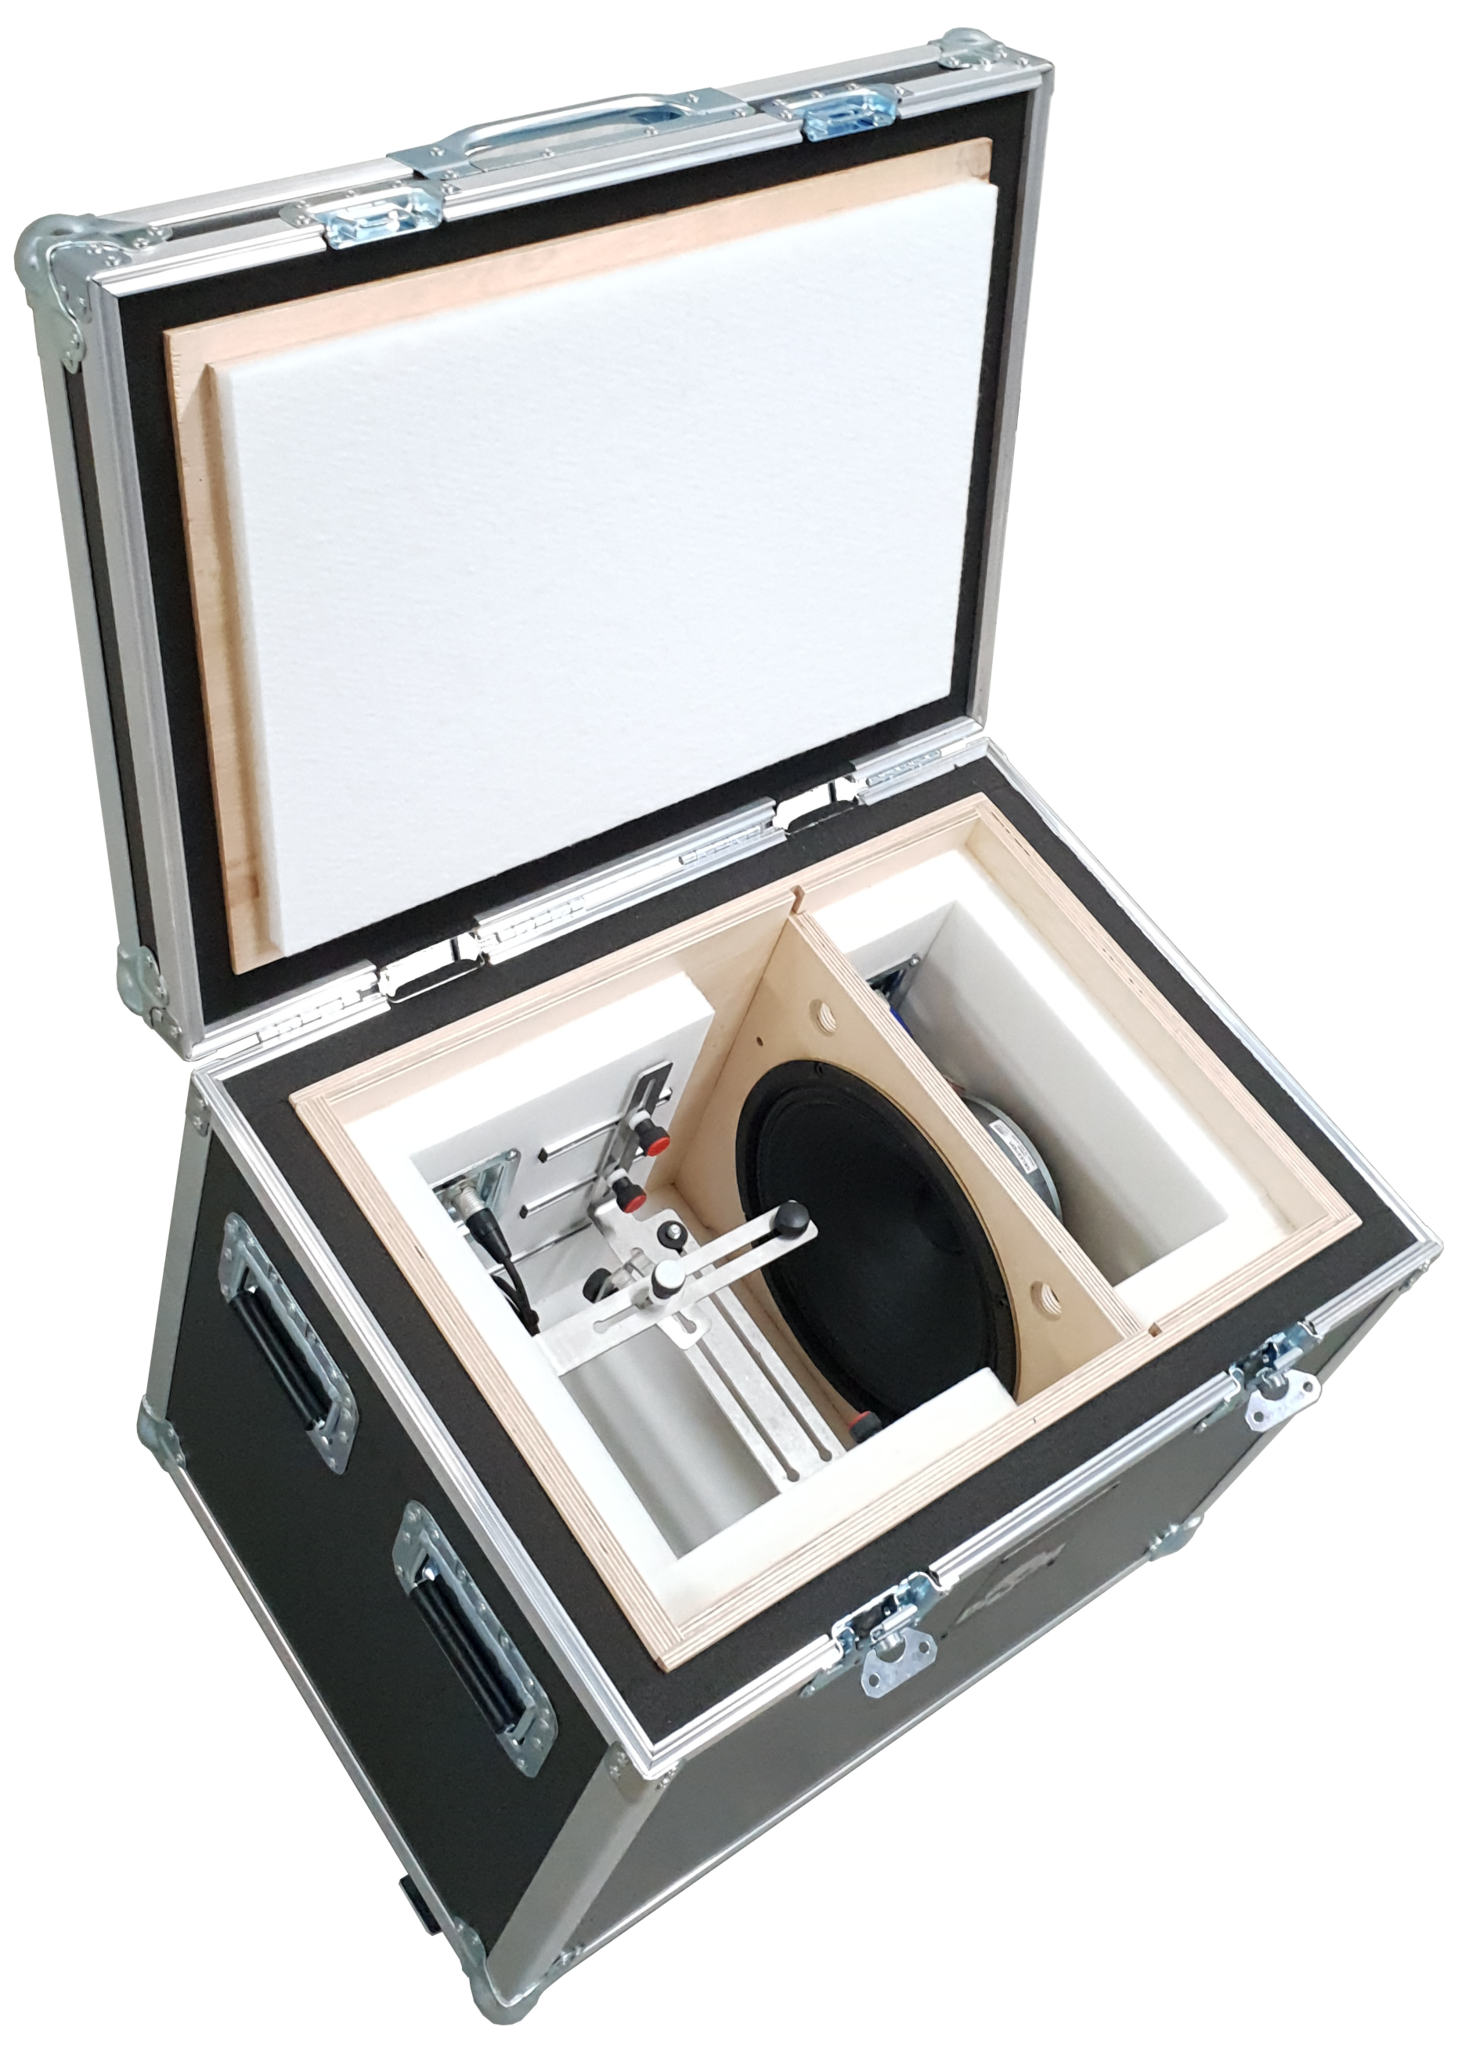 Bass Guitar Isolation Cabinet For High